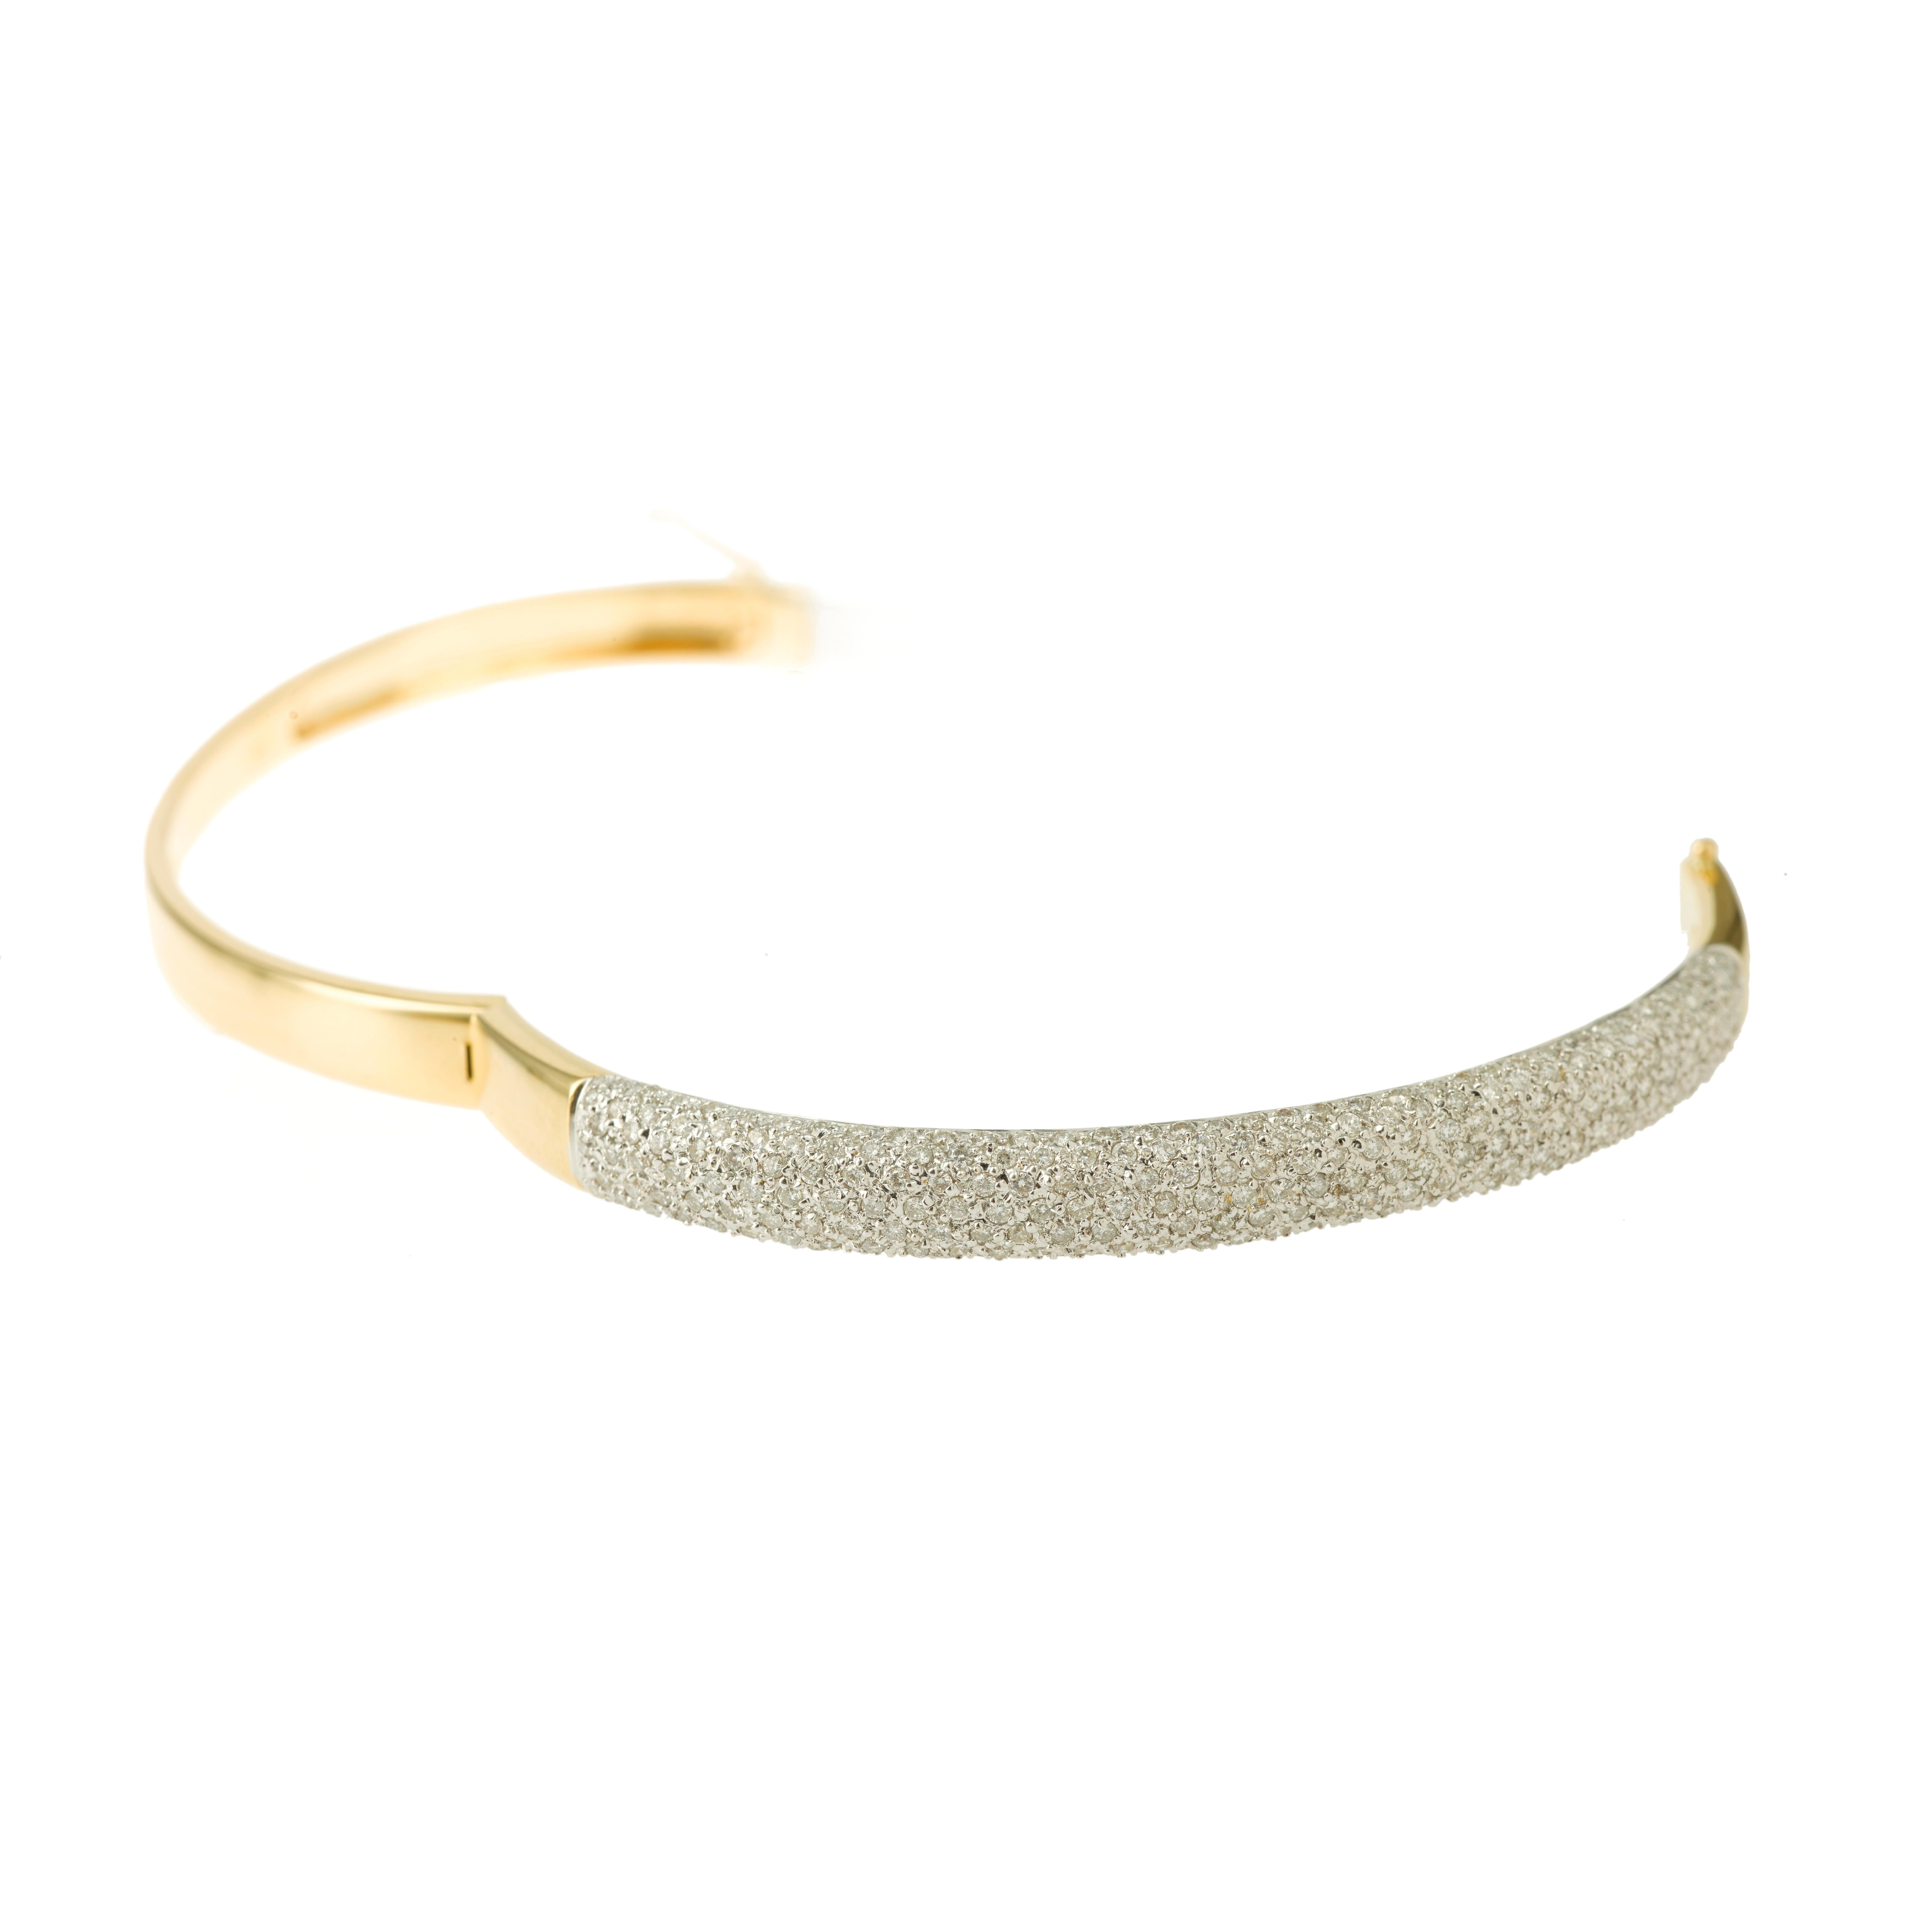 A nice and elegant Yellow gold bangle bracelet paved with 250 brilliant cut diamonds.

Yellow Gold 18 Carats, 750 / 1000th. Eagle's head hallmark 

Total Weight of Diamonds : approx 1.25 carats

Width: 65 mm / 2.55 inches

Wrist: 19 cm / 7.48